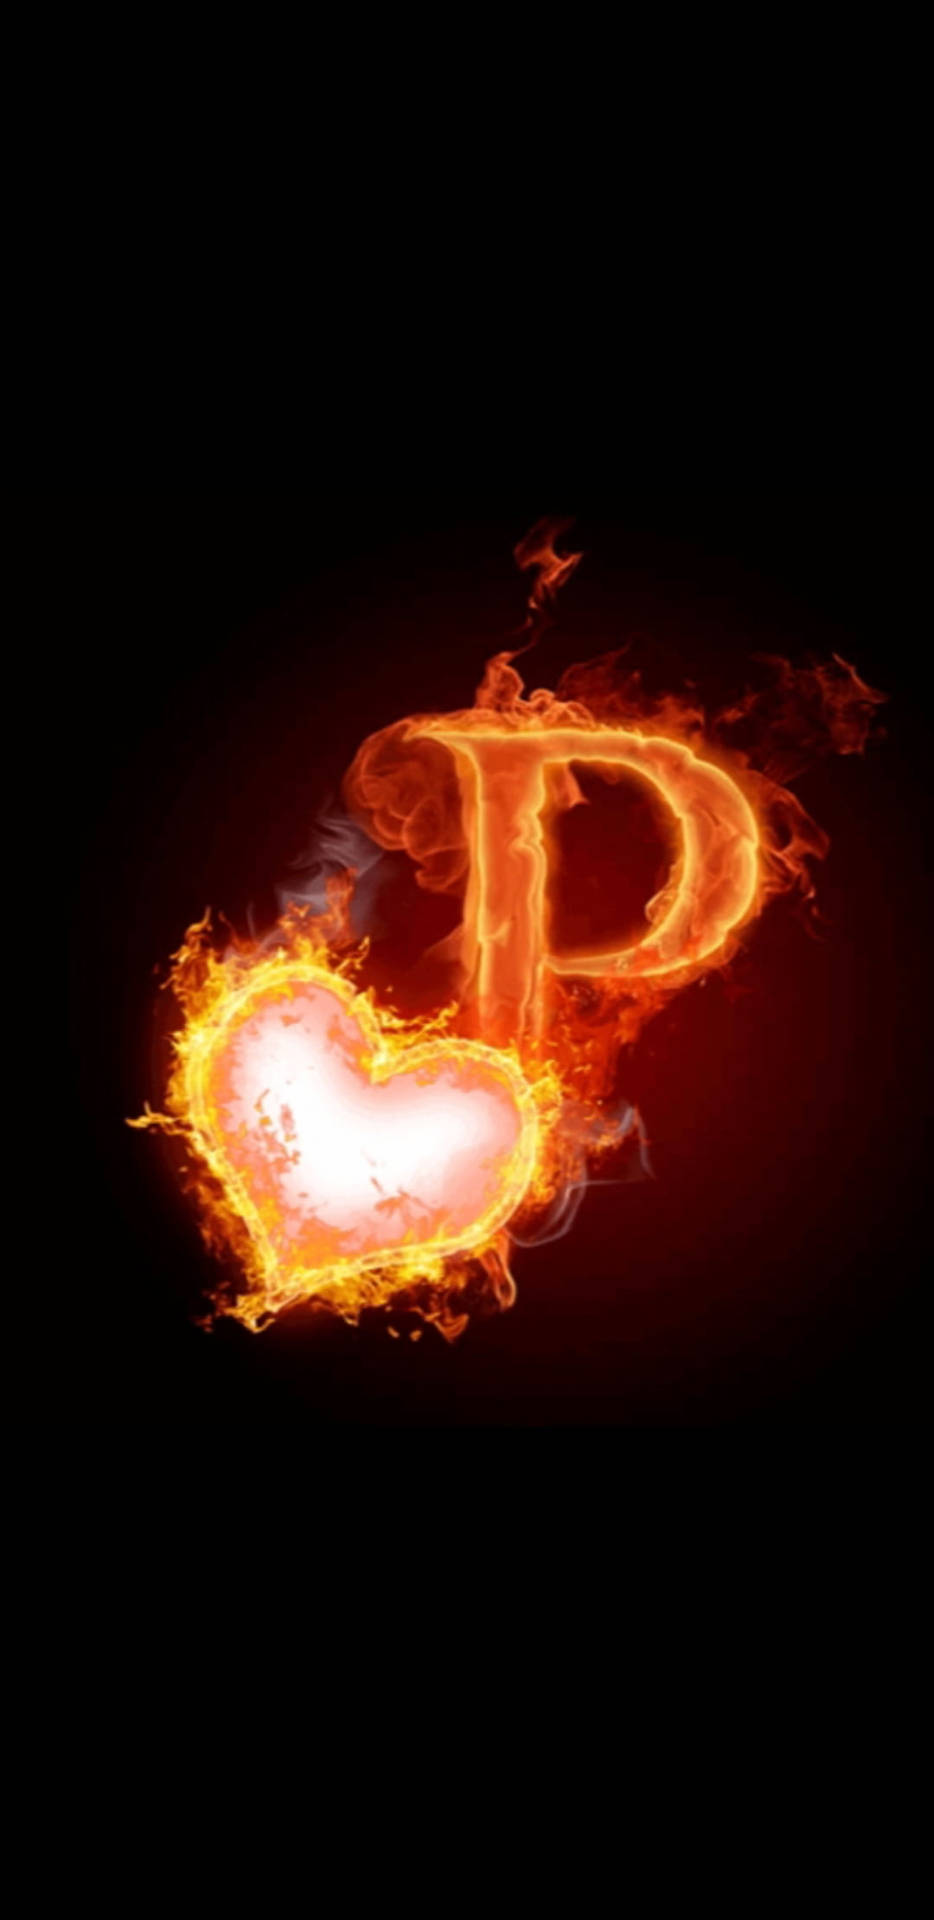 P Letter And Burning Heart